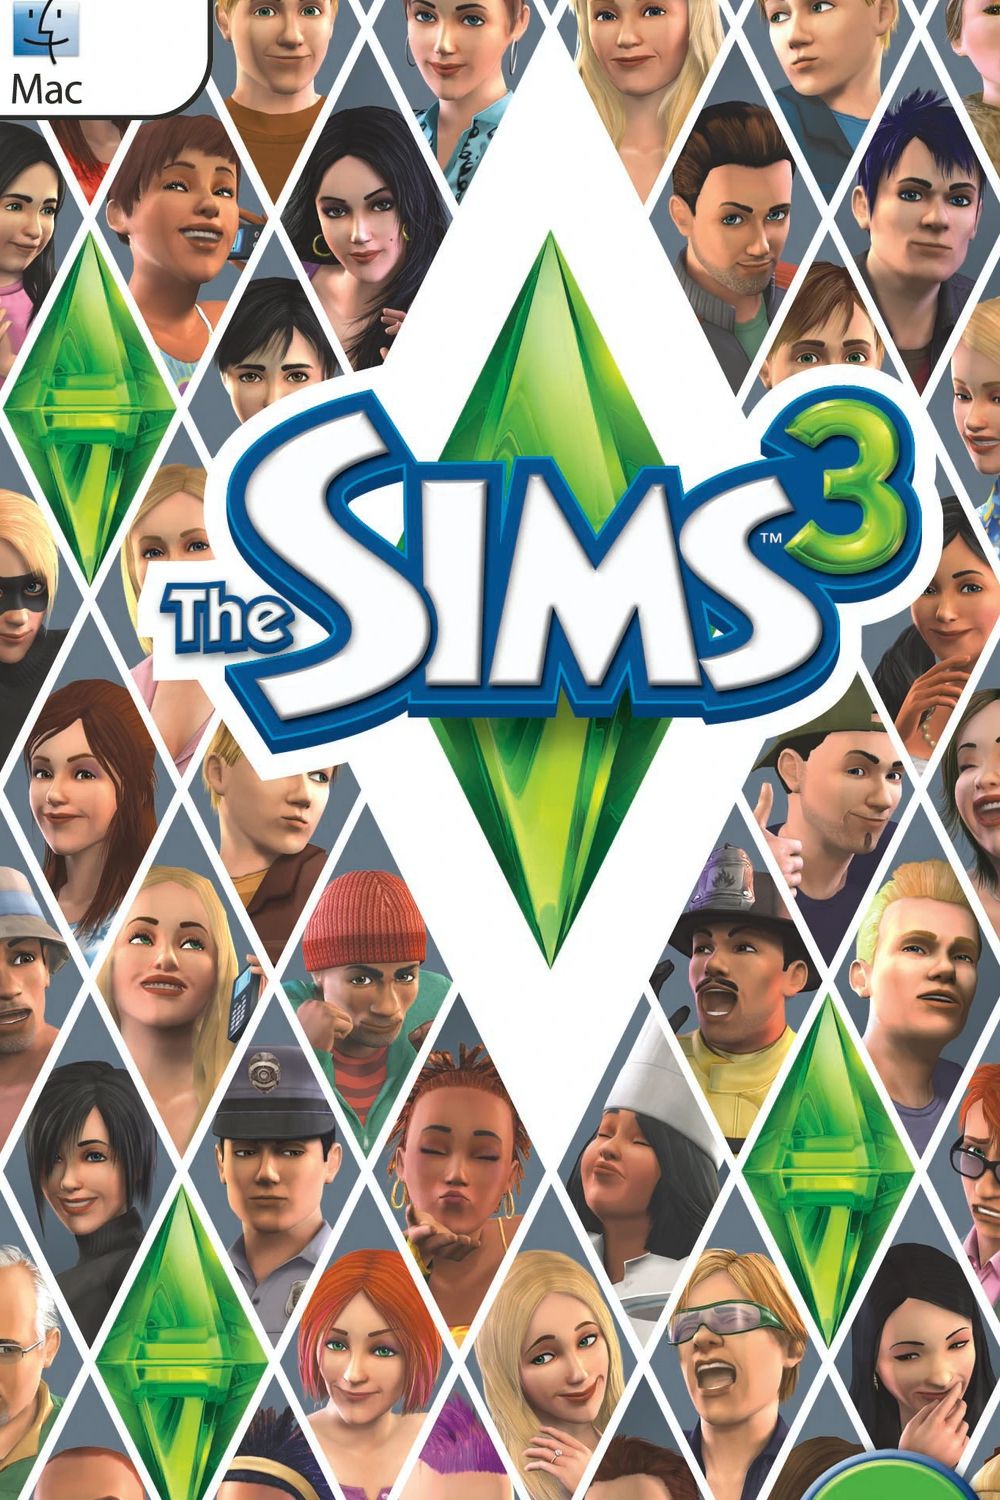 The Sims 3 game